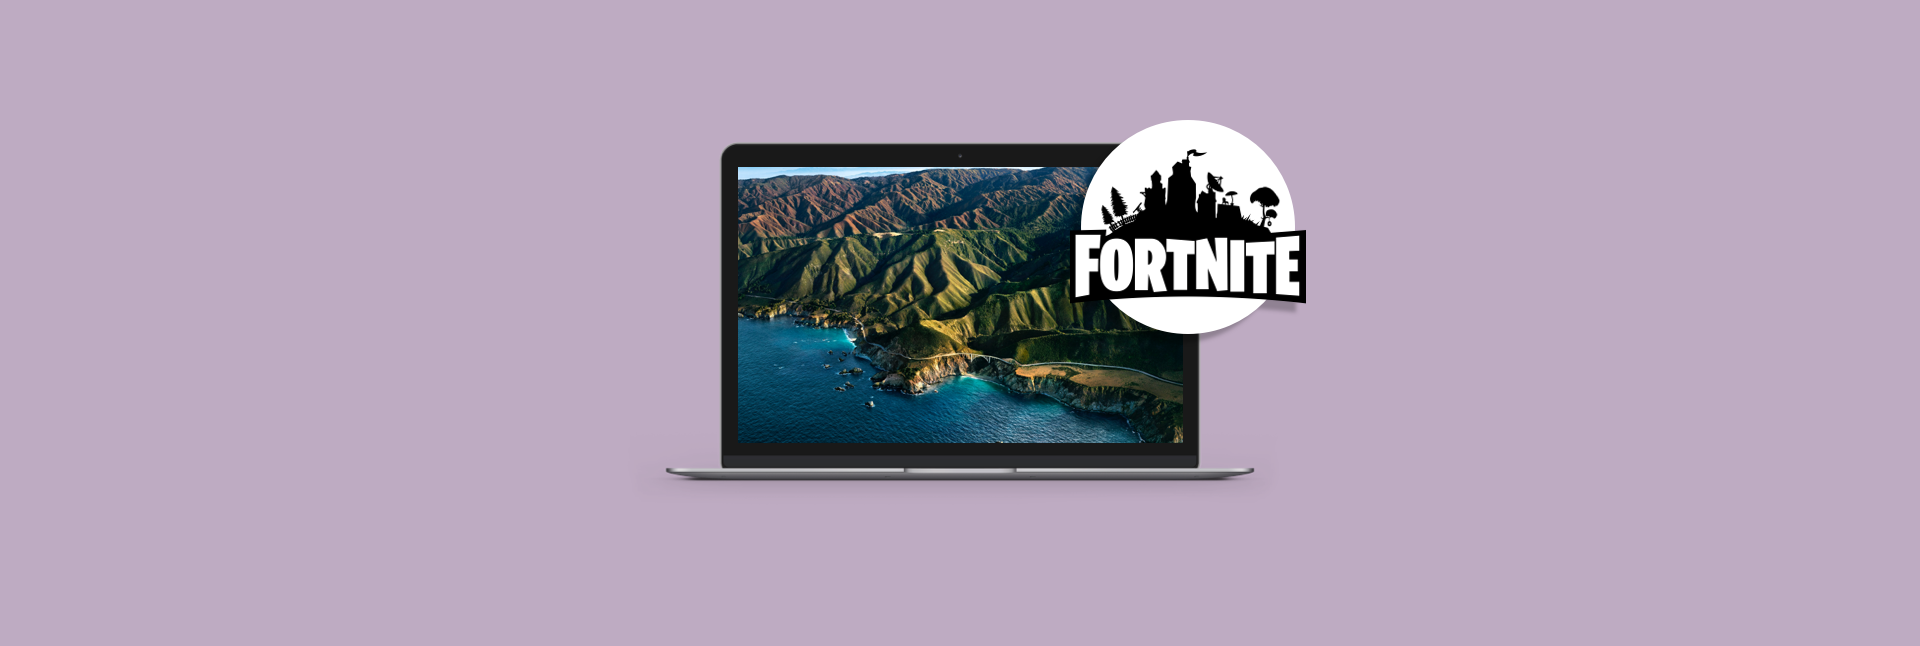 how to use a controller for fortnite on mac